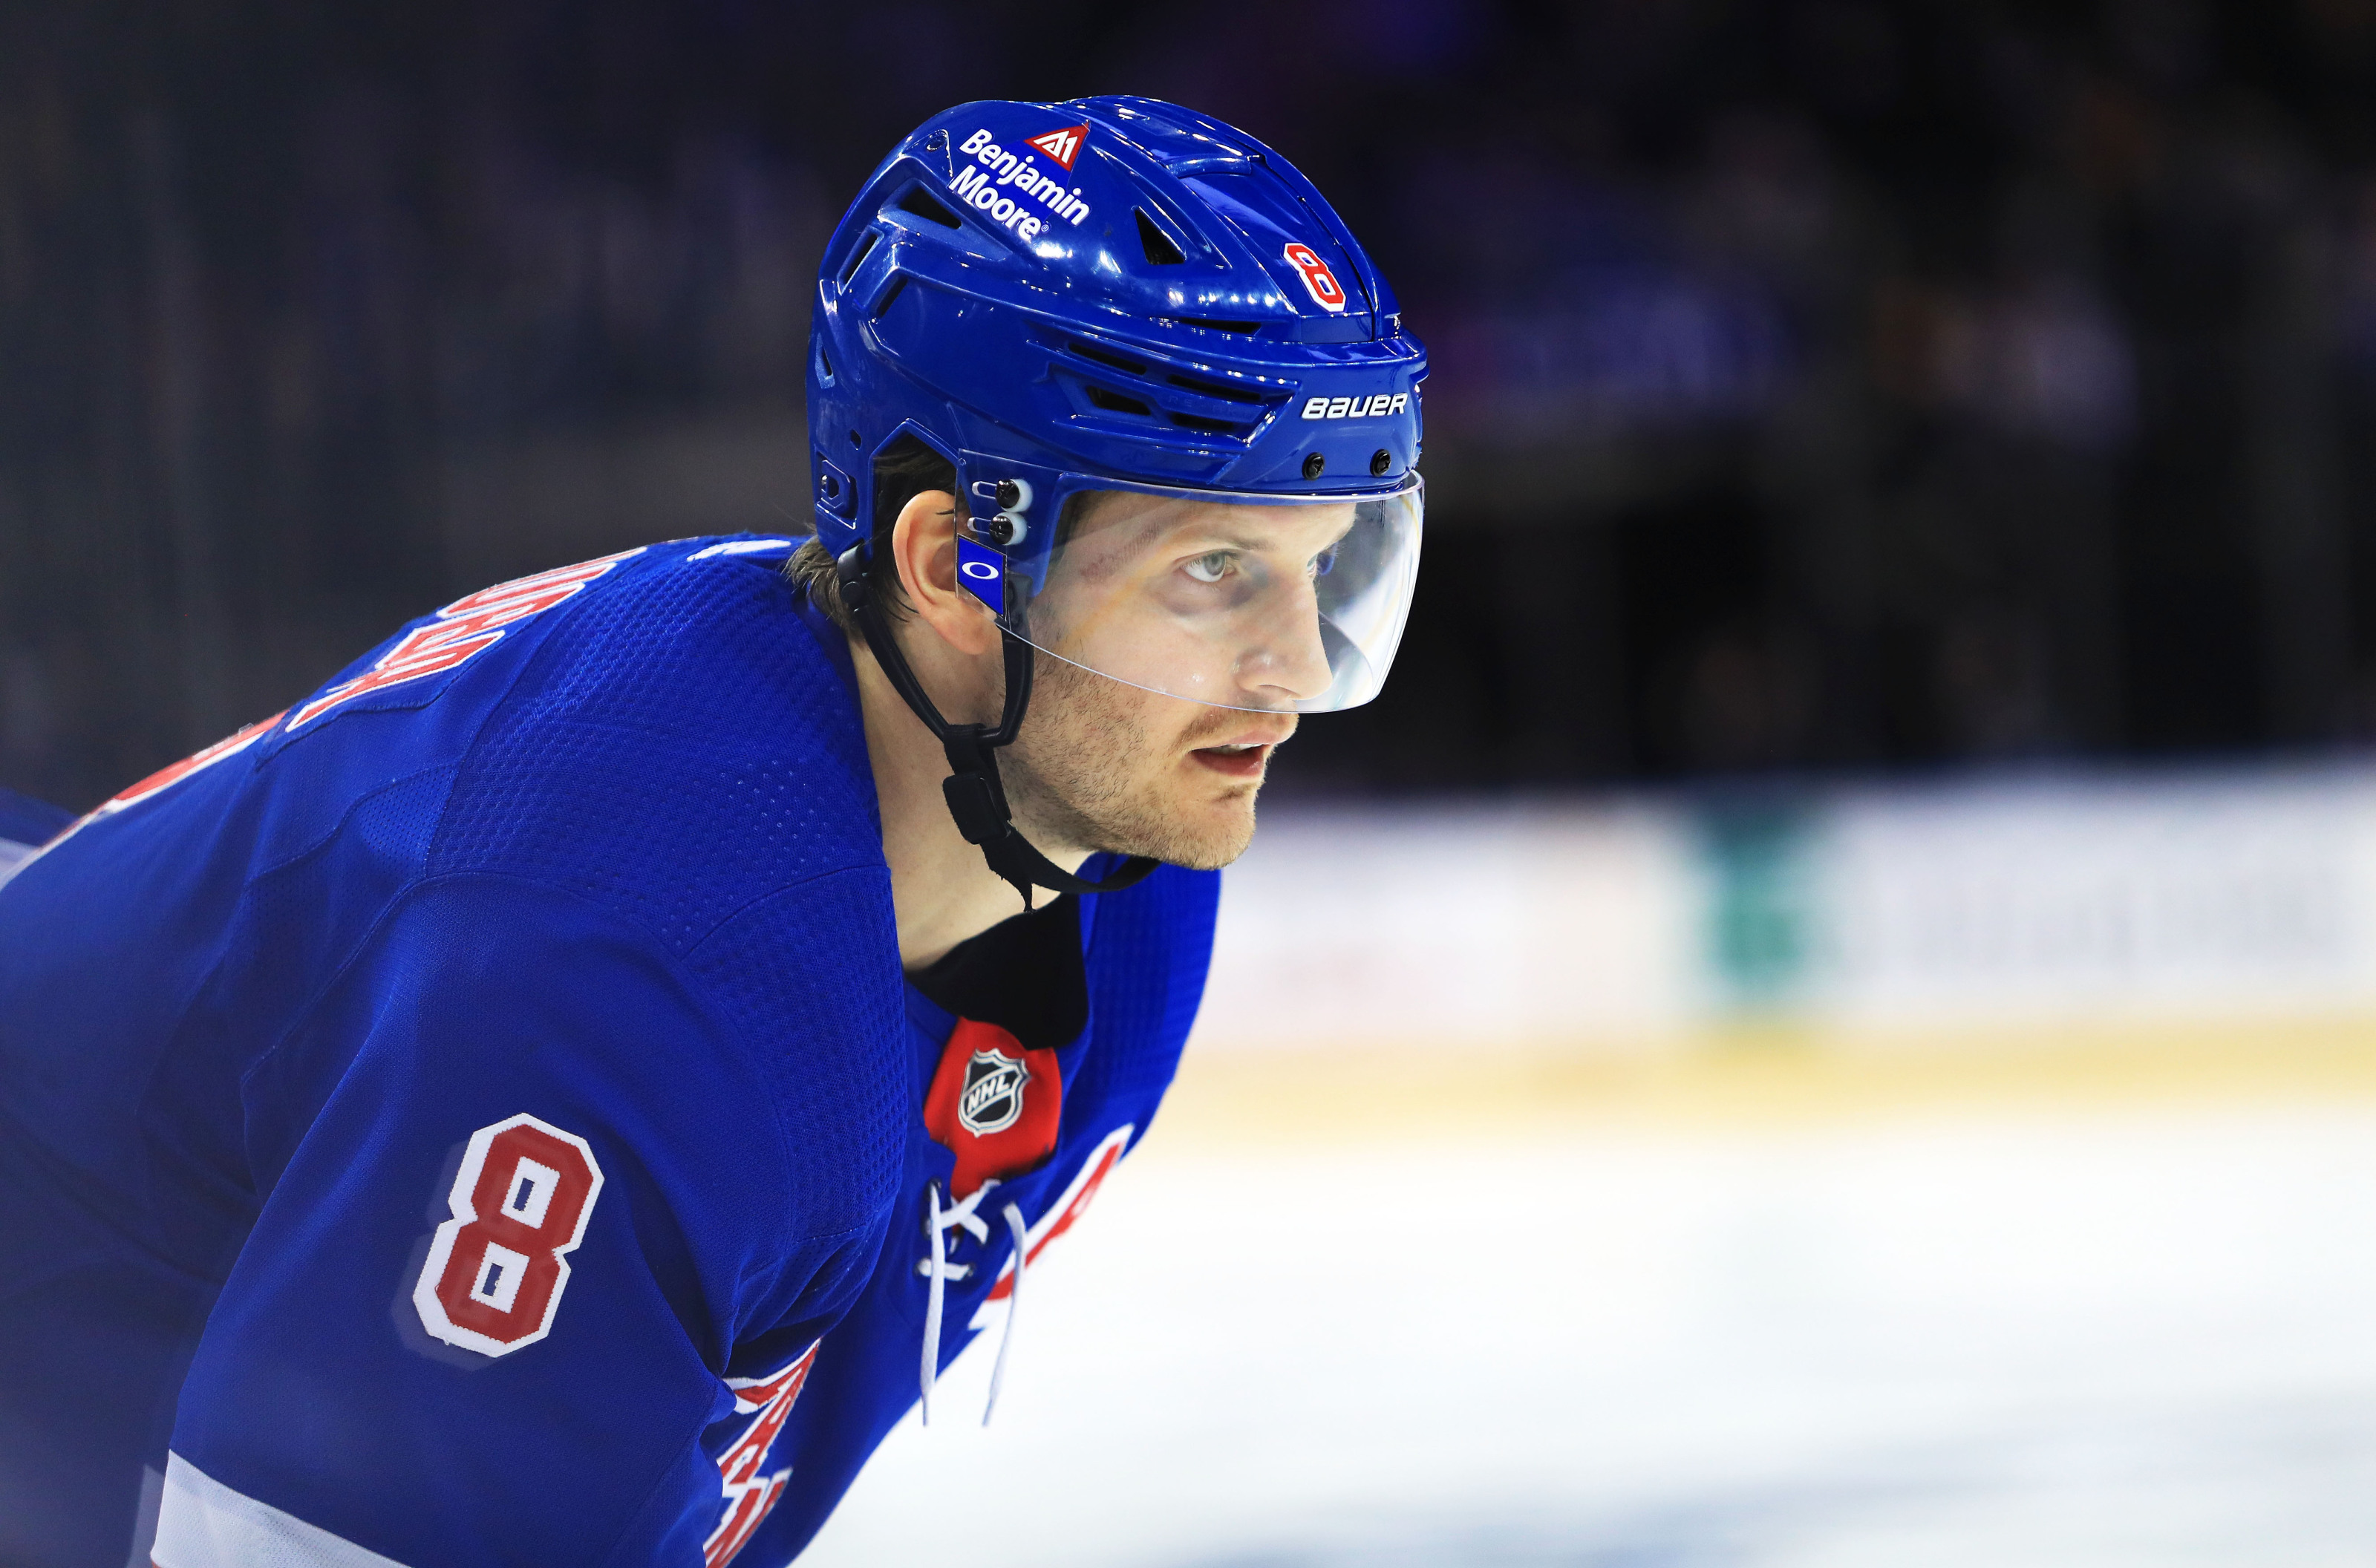 Rangers president: There's no rush to name new captain